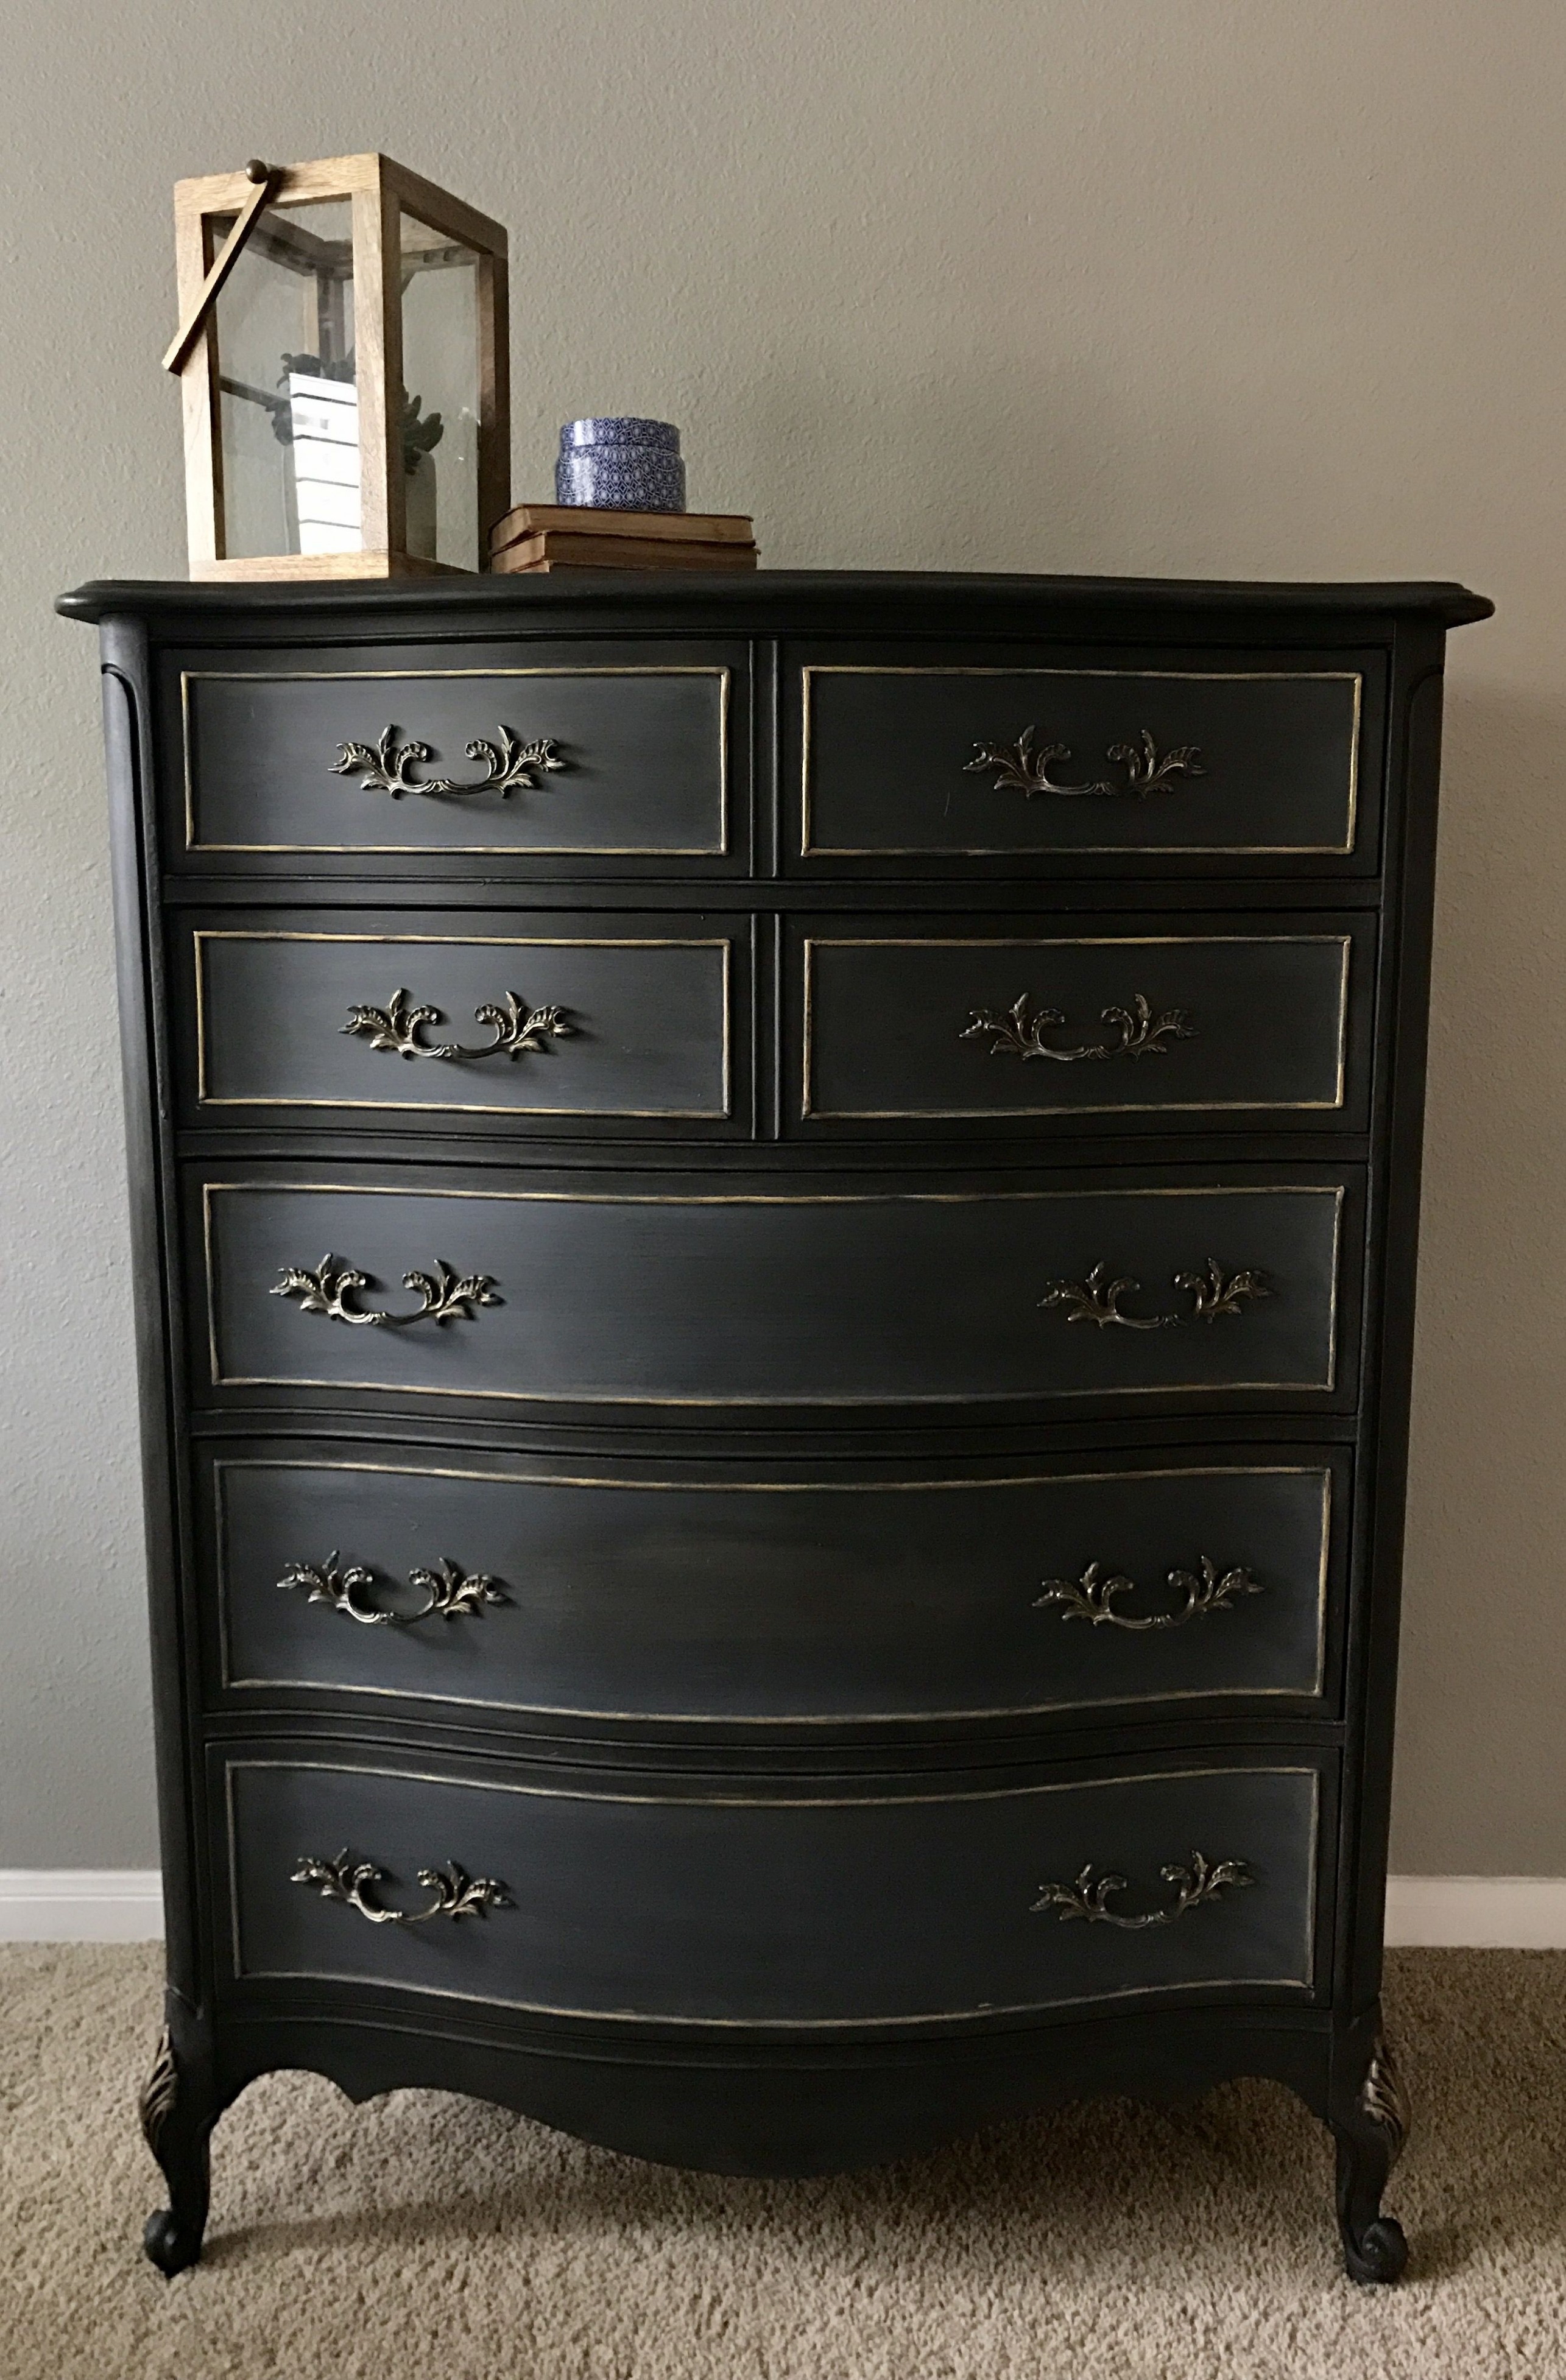 Chalk Paint® By Annie Sloan In A Two Toned Graphite Finish ..